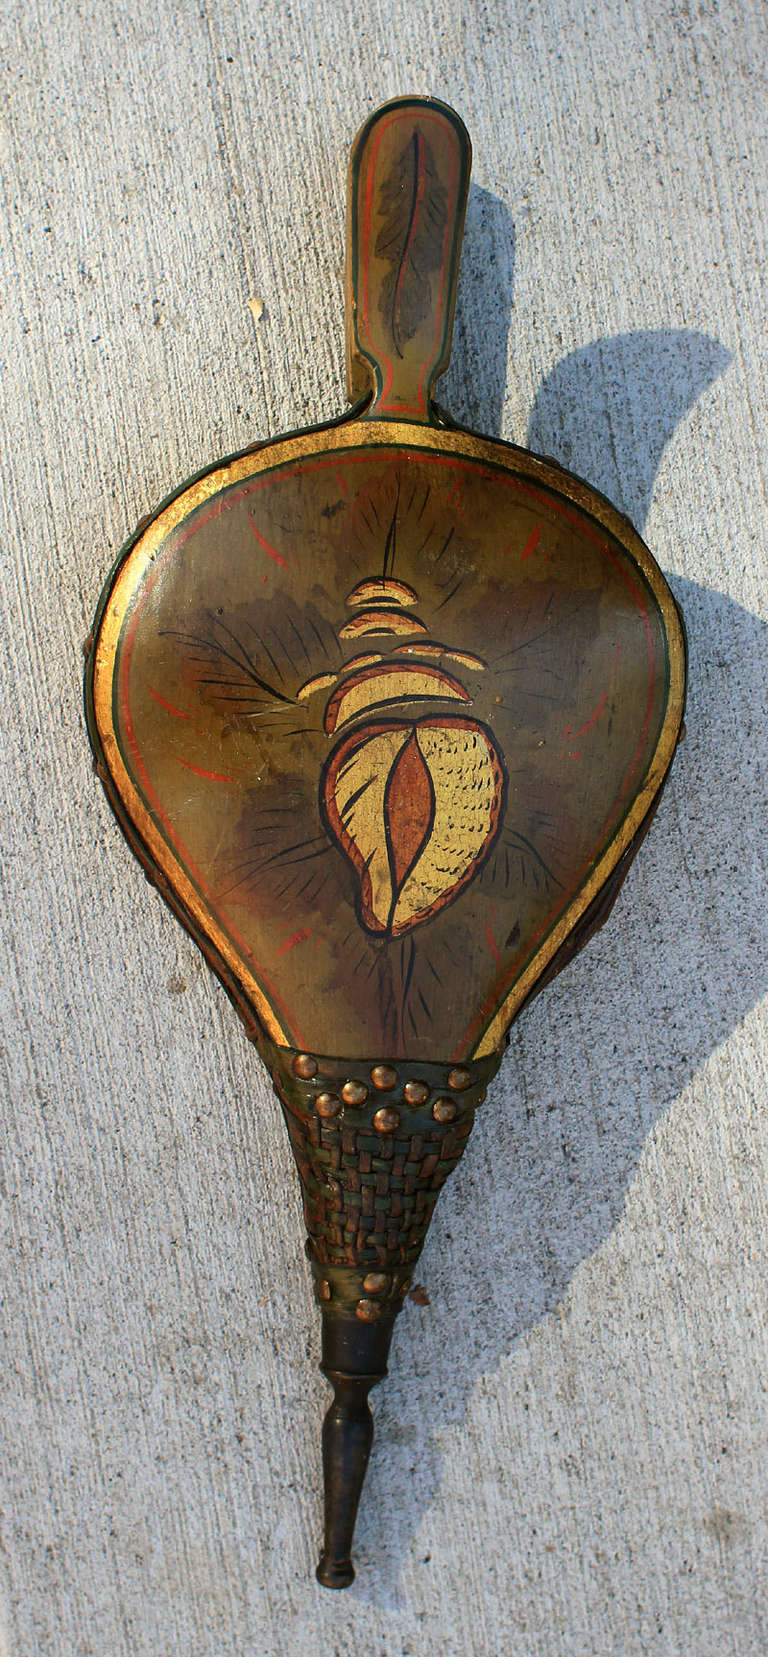 American folk painted turtleback bellows with all original paint and gold shell and leaf decoration and a gold and red line border, nicely contrasted on a deep ochre field; leather and mechanics have been restored and its now in good working